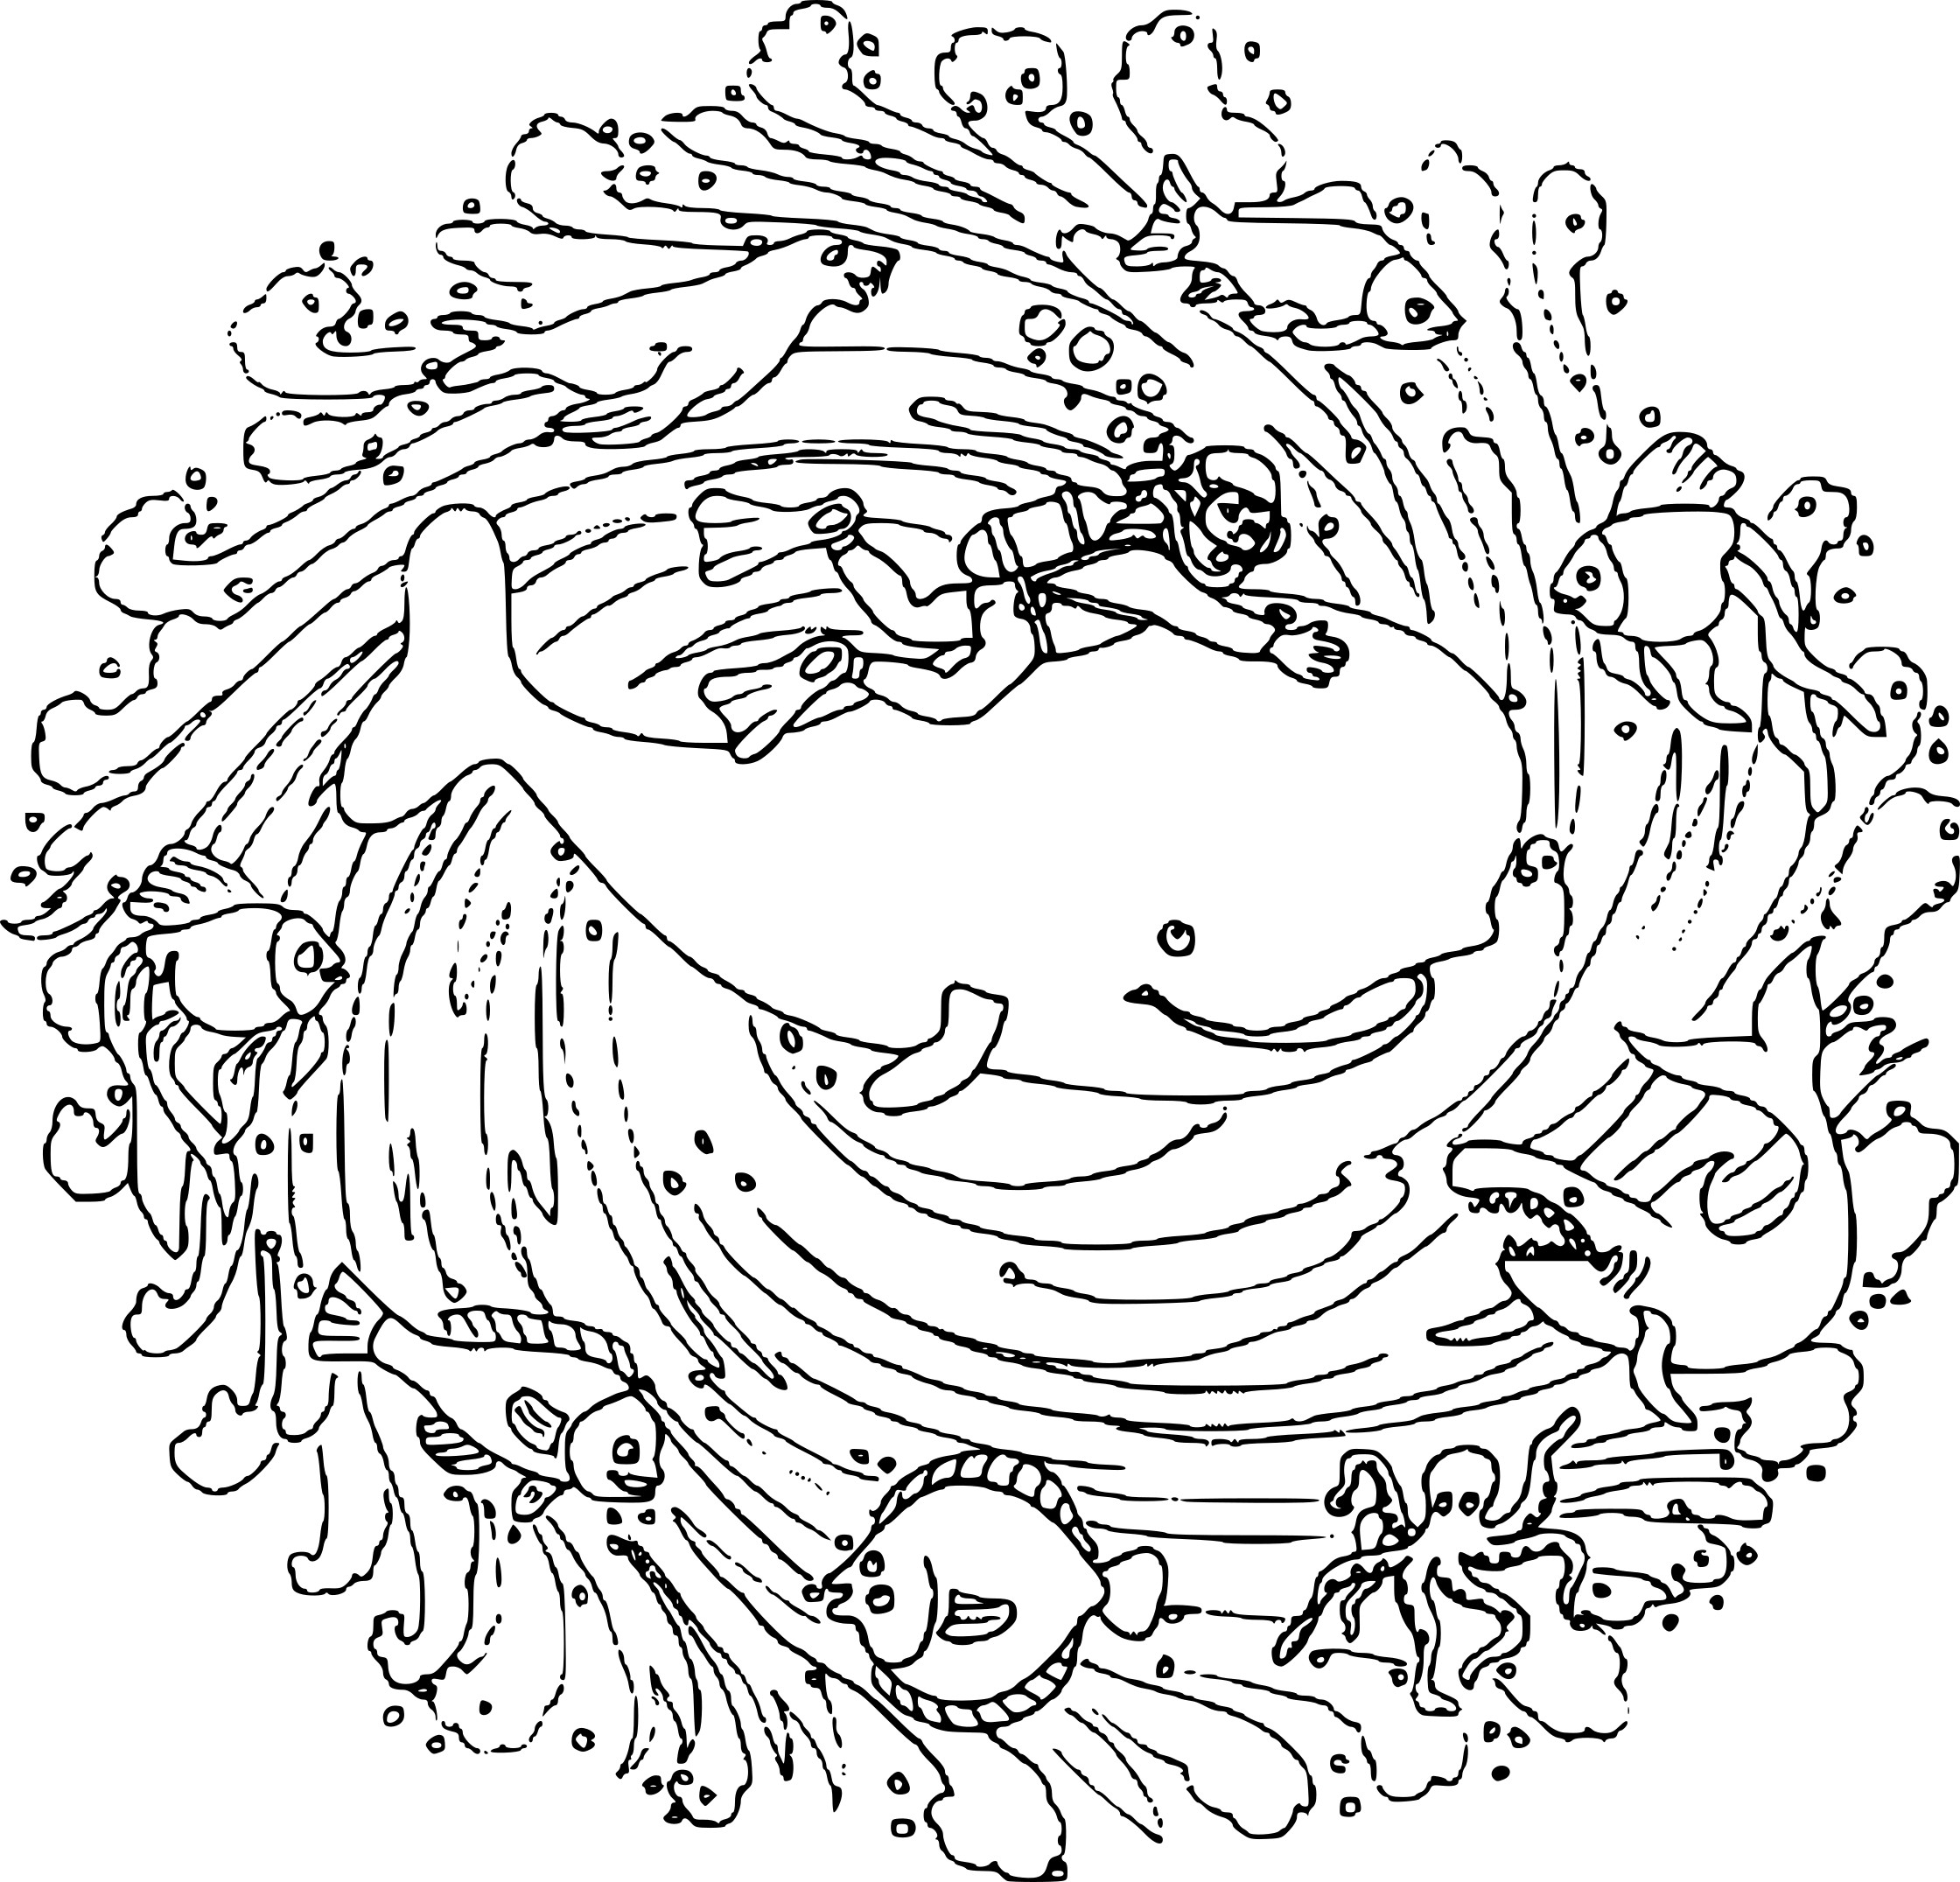 Mandala Marine Animals coloring page - free printable coloring pages on  coloori.com